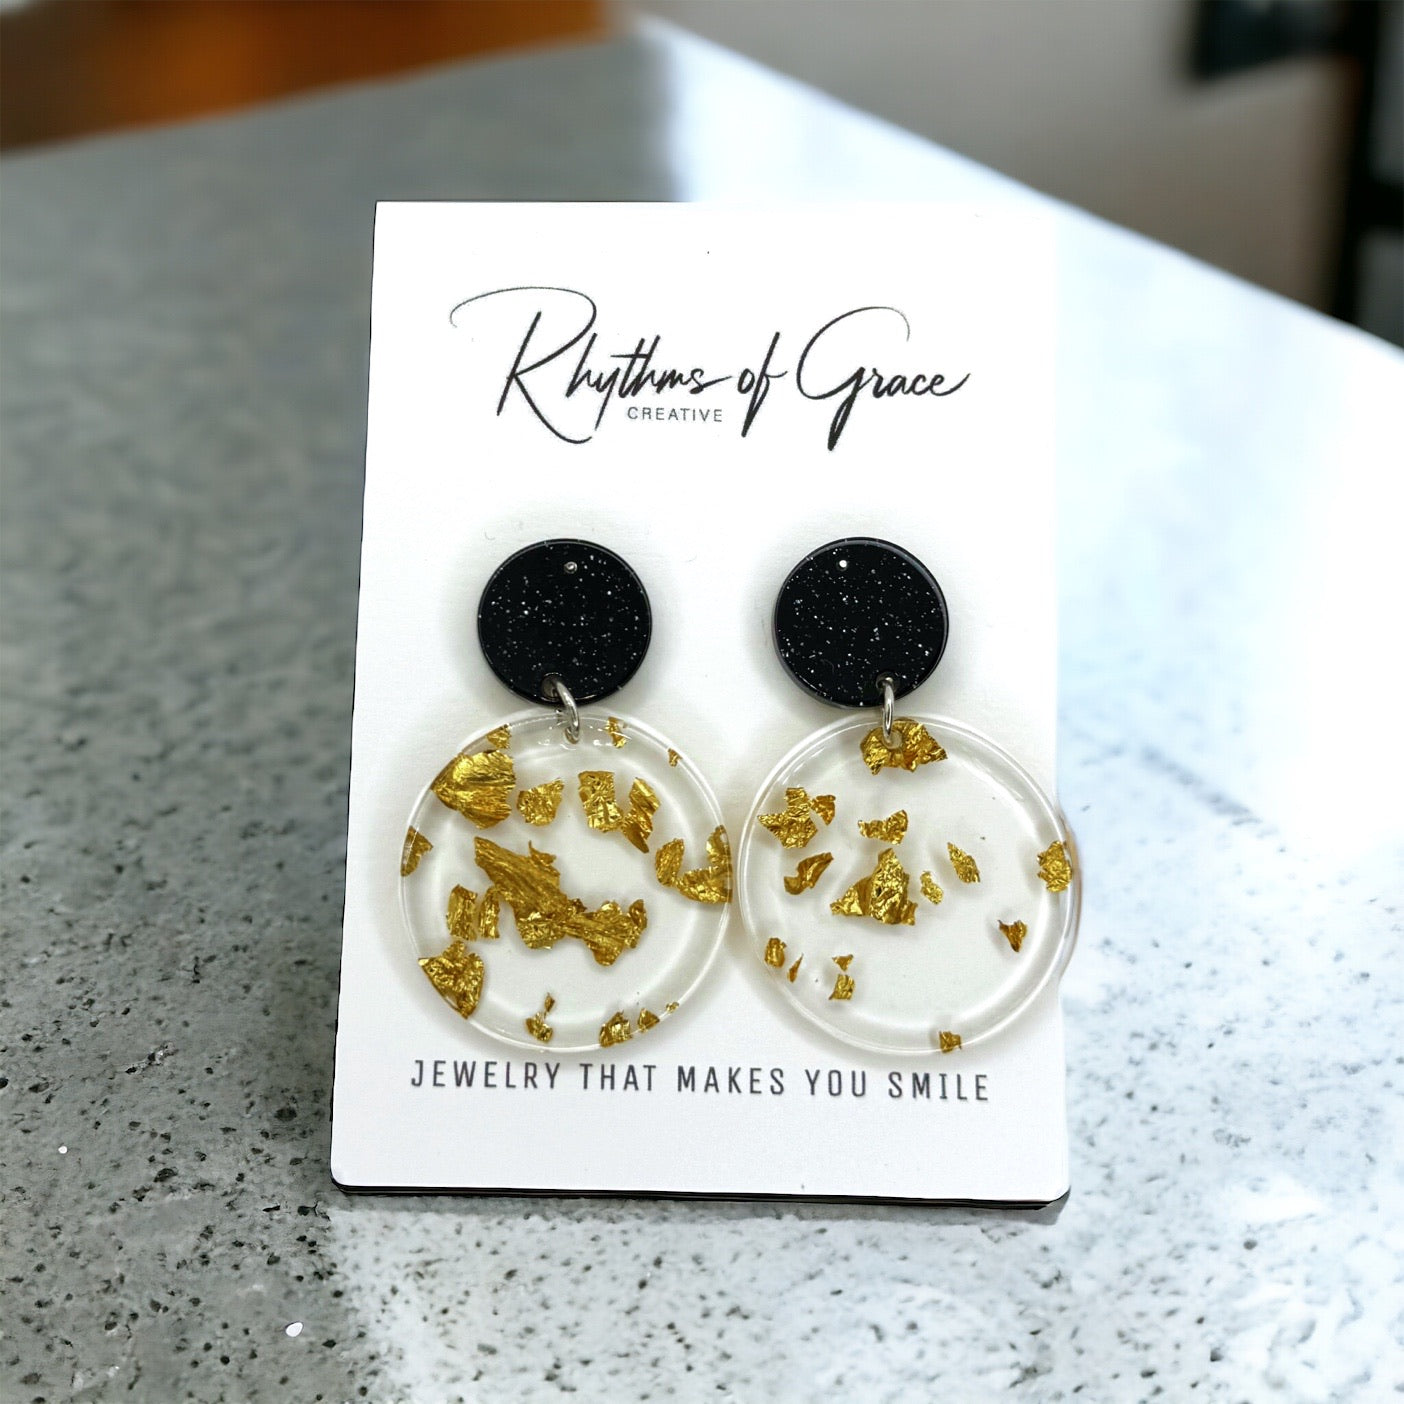 Elegant Gold and Black Acrylic Earrings with Gold Leaf Flecks - Stainless Steel Posts